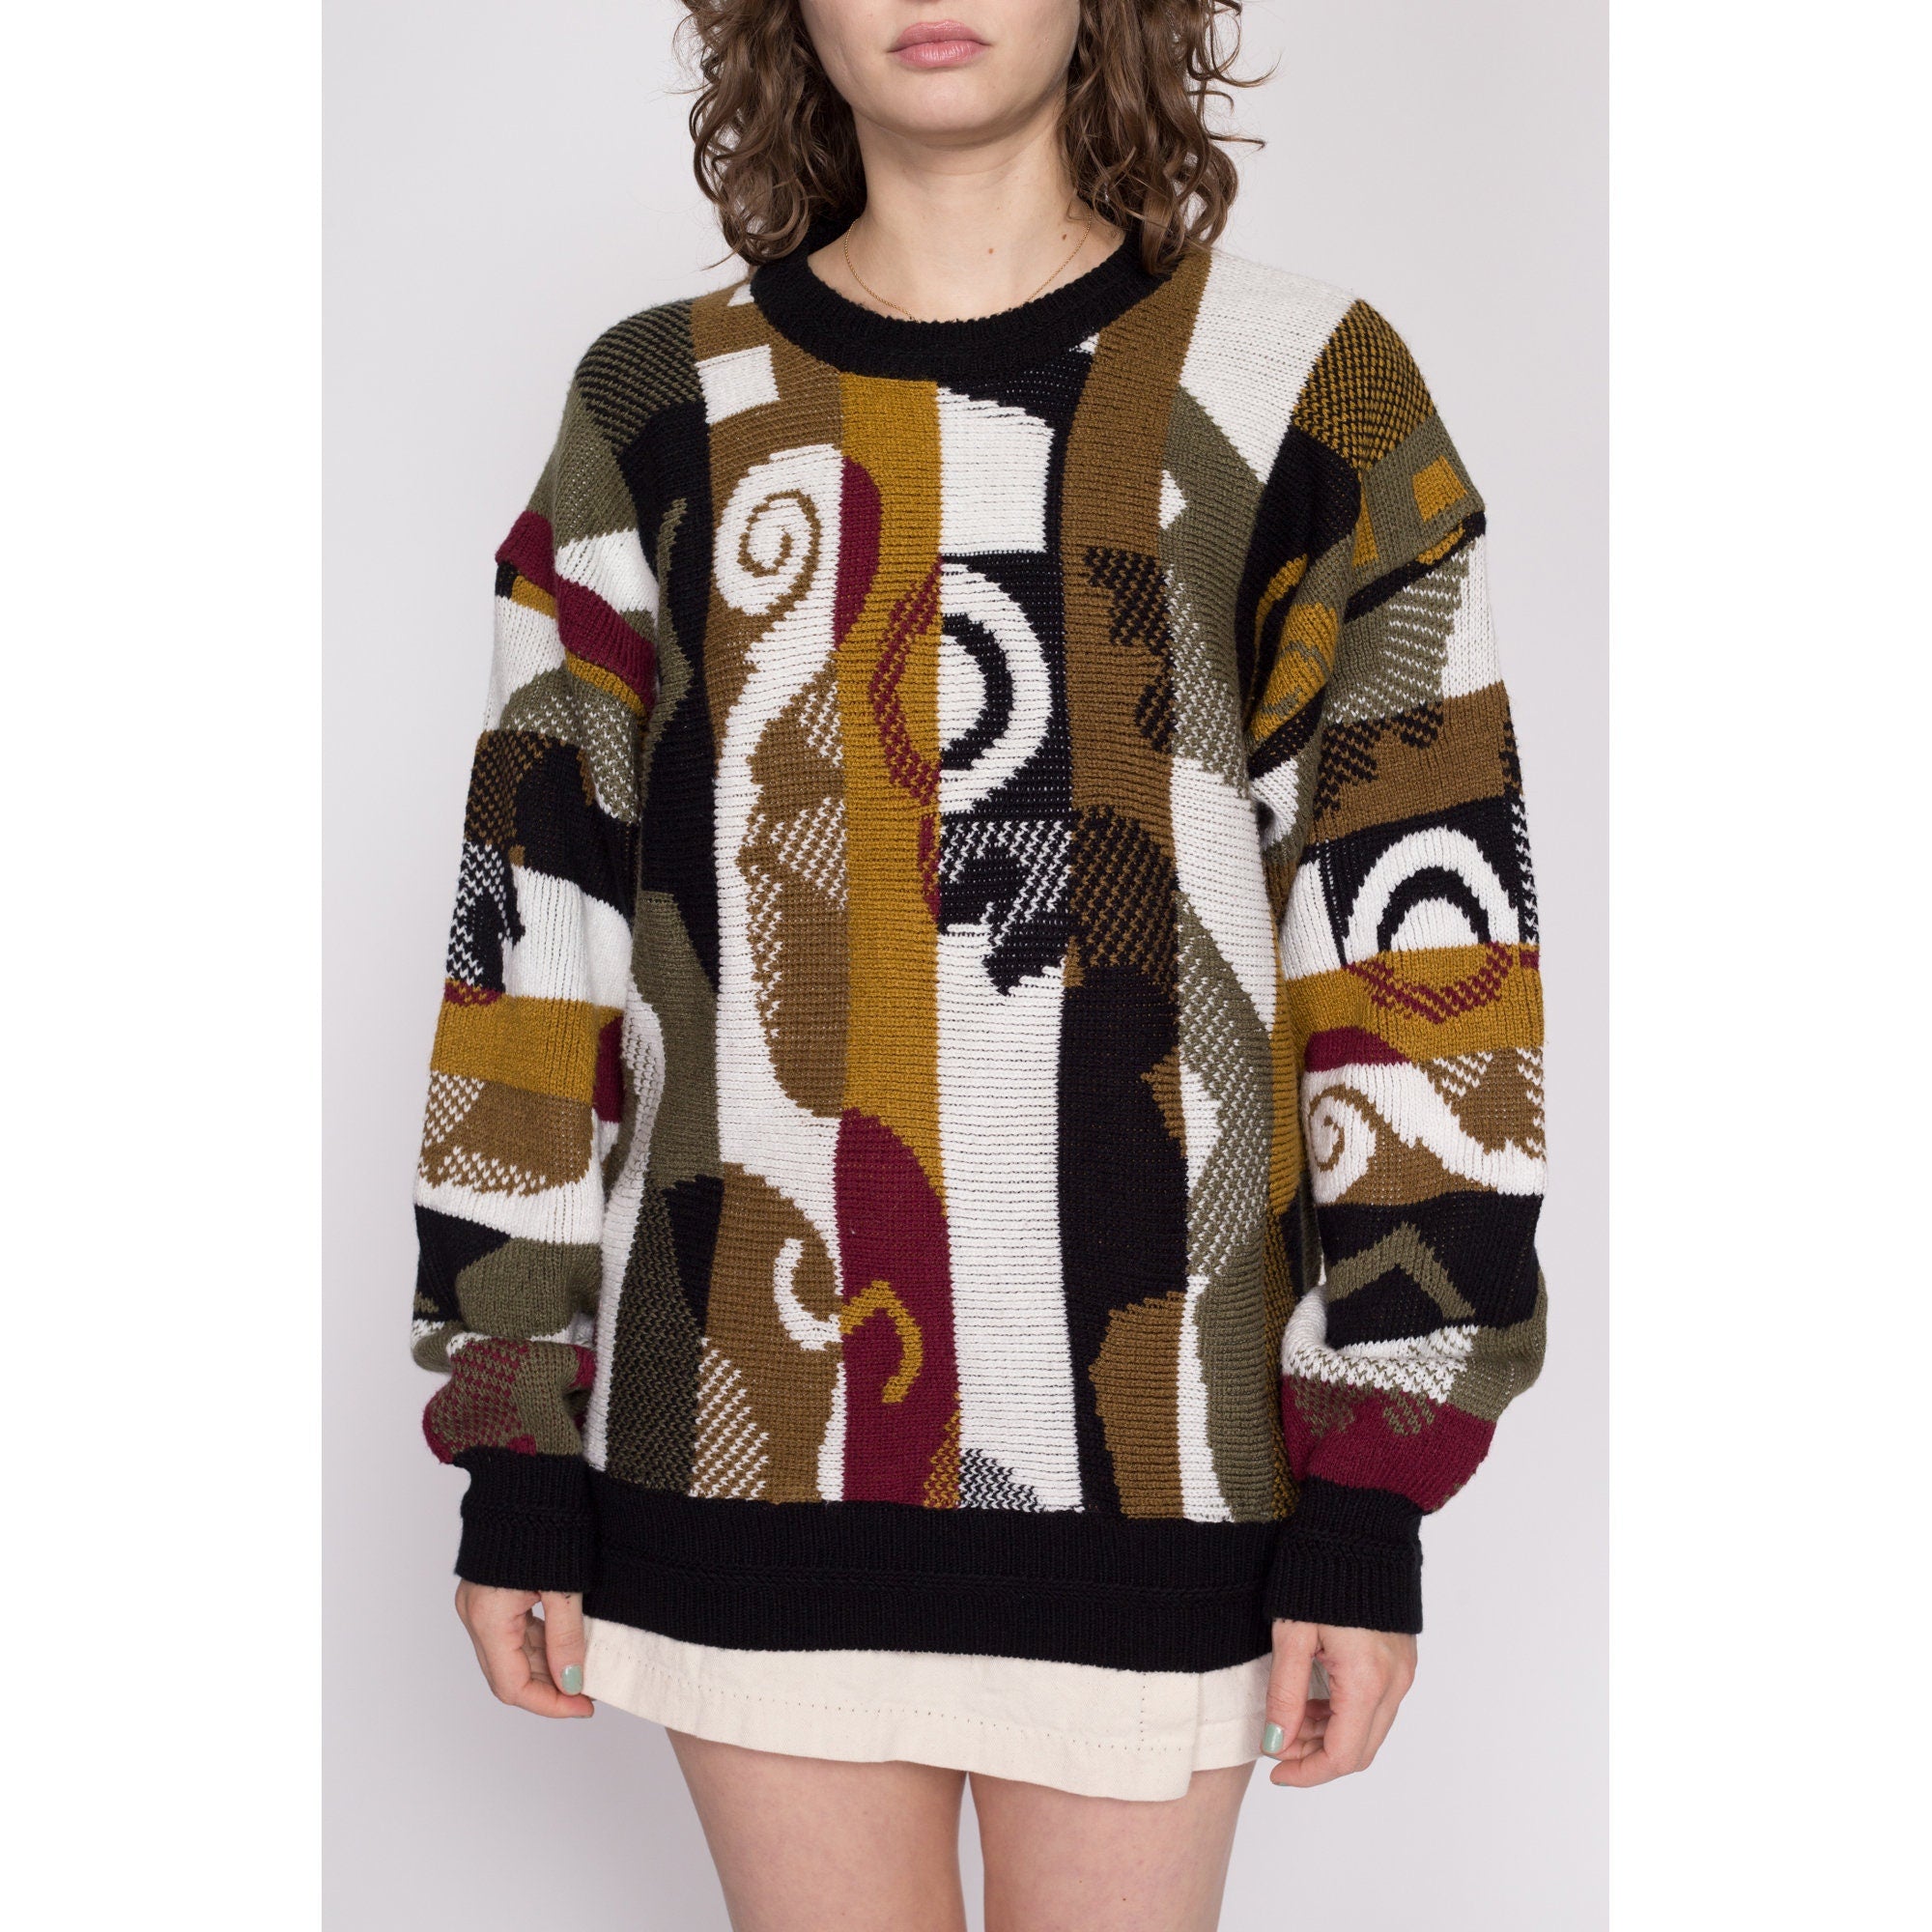 Lrg-XL 90s Abstract Slouchy Knit Sweater Unisex – Flying Apple Vintage